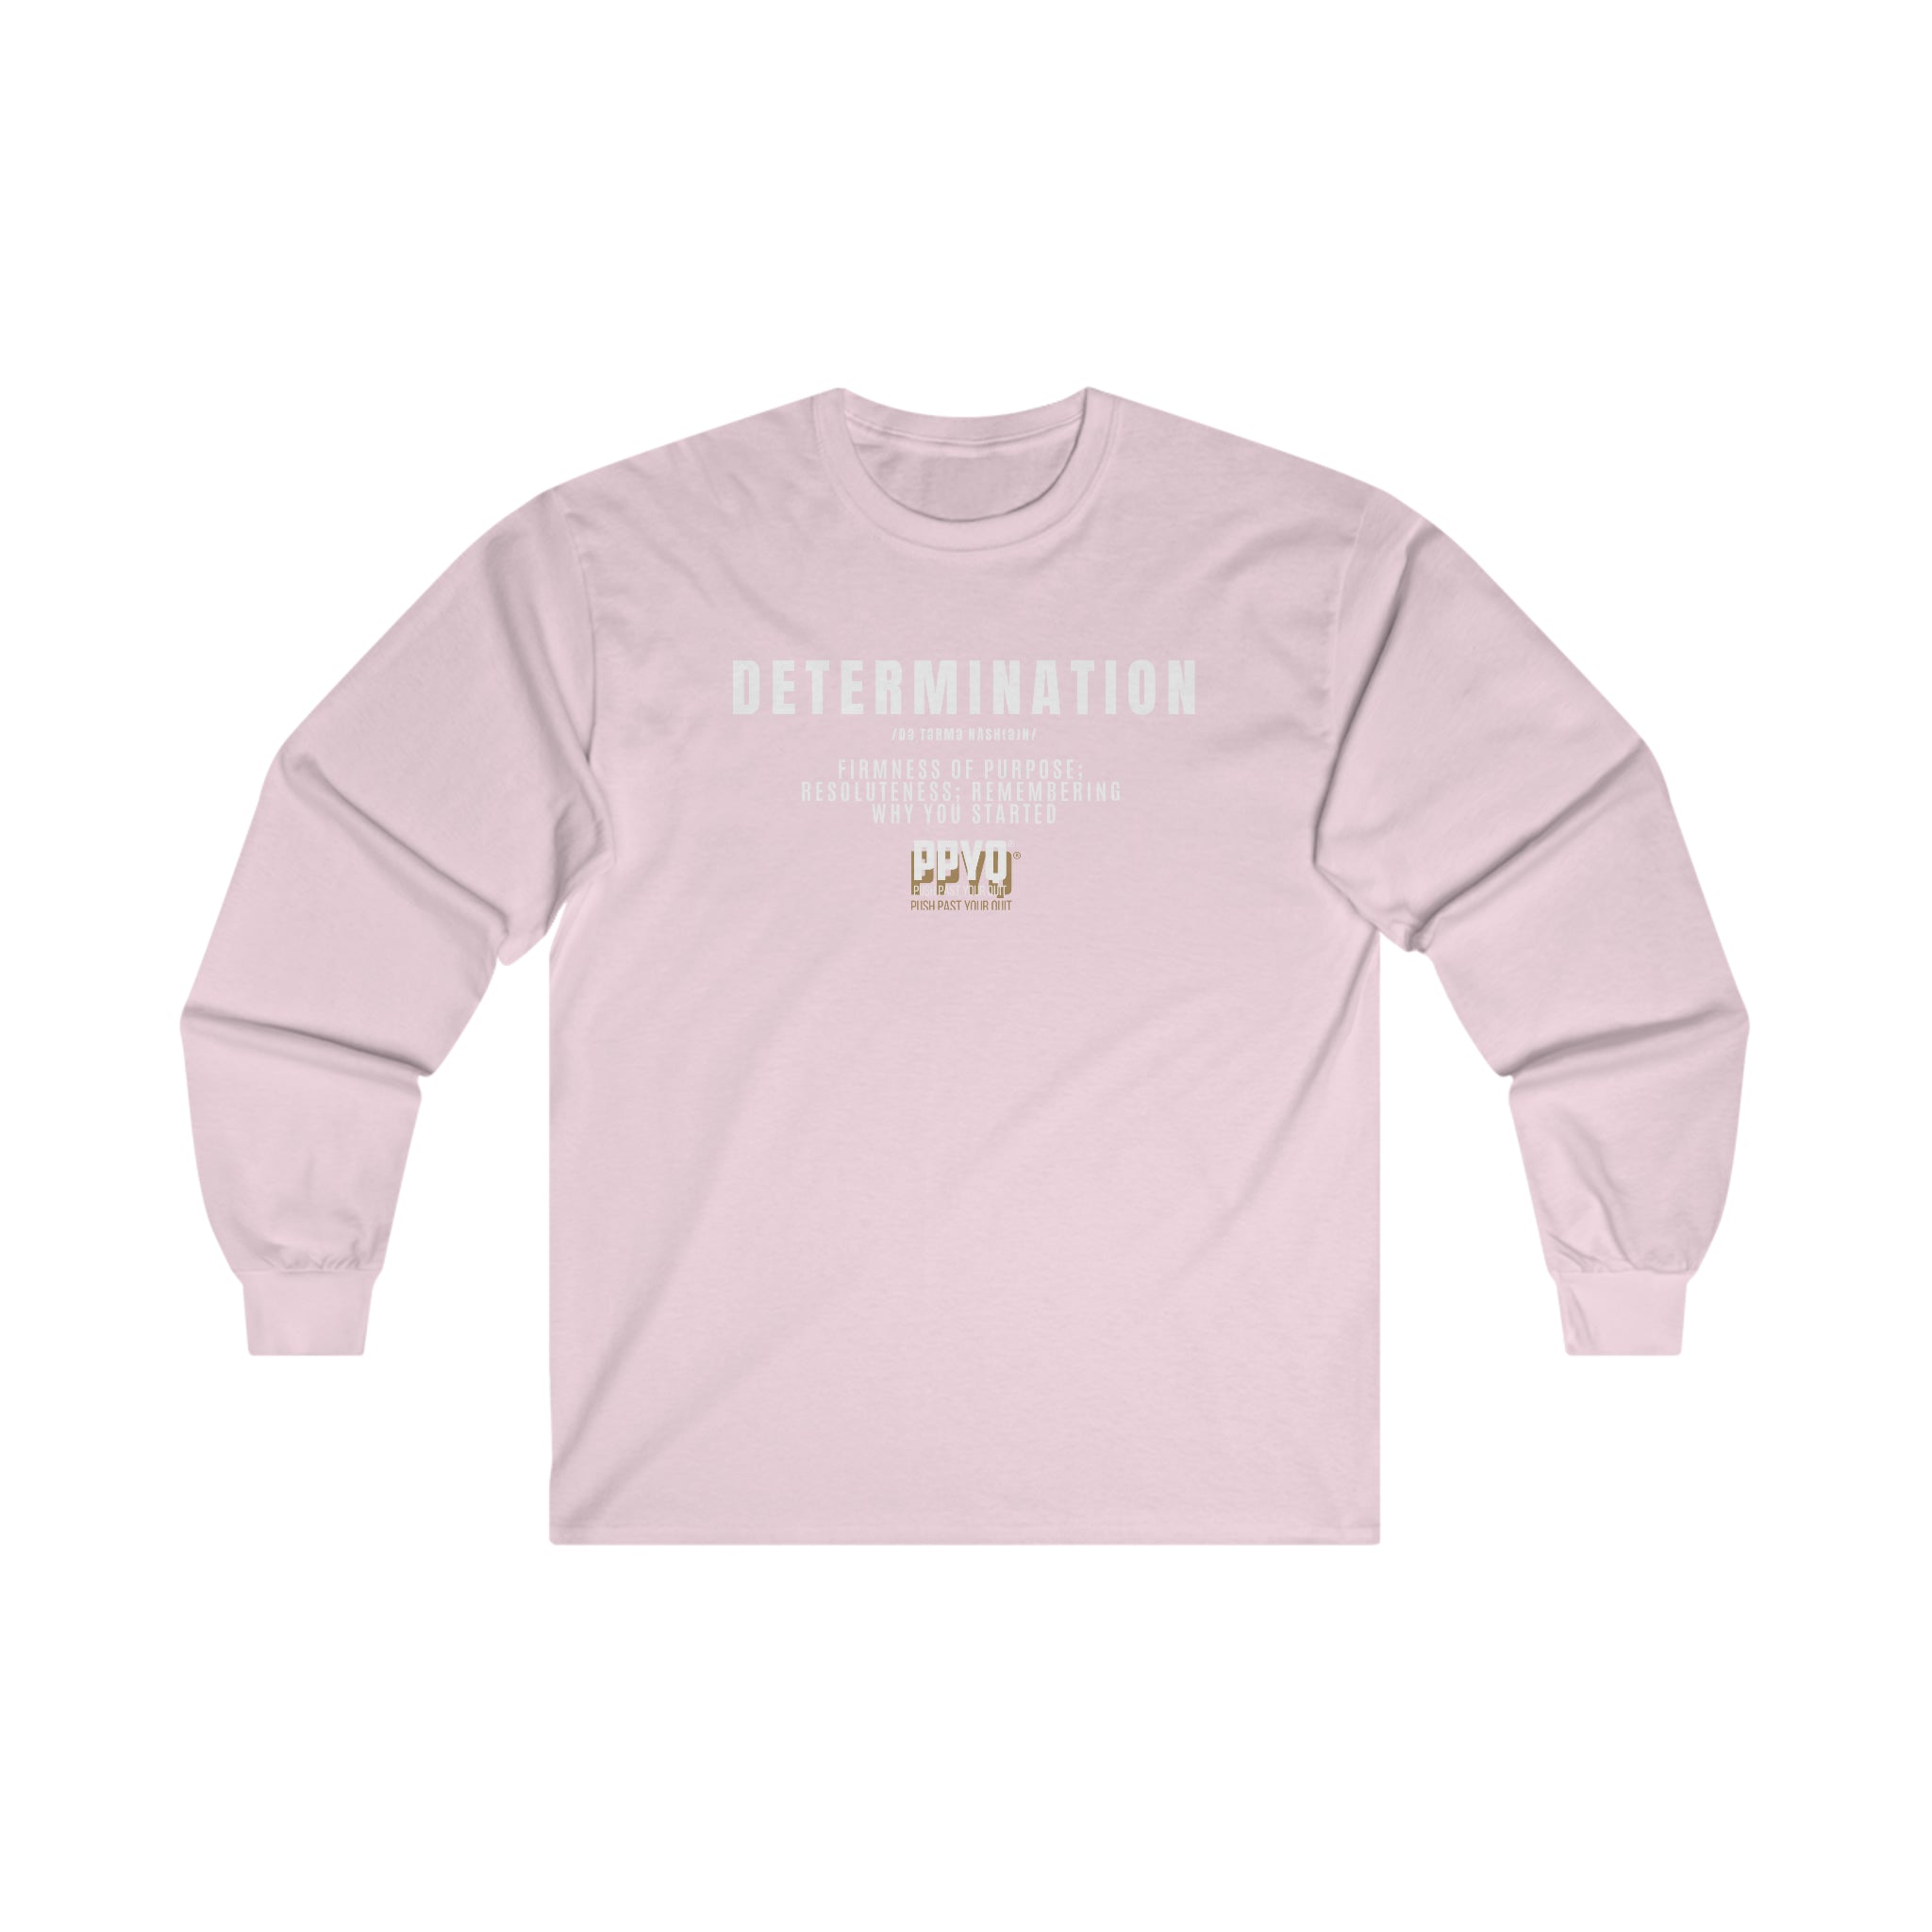 Determination PPYQ® Defined Long Sleeve Tee